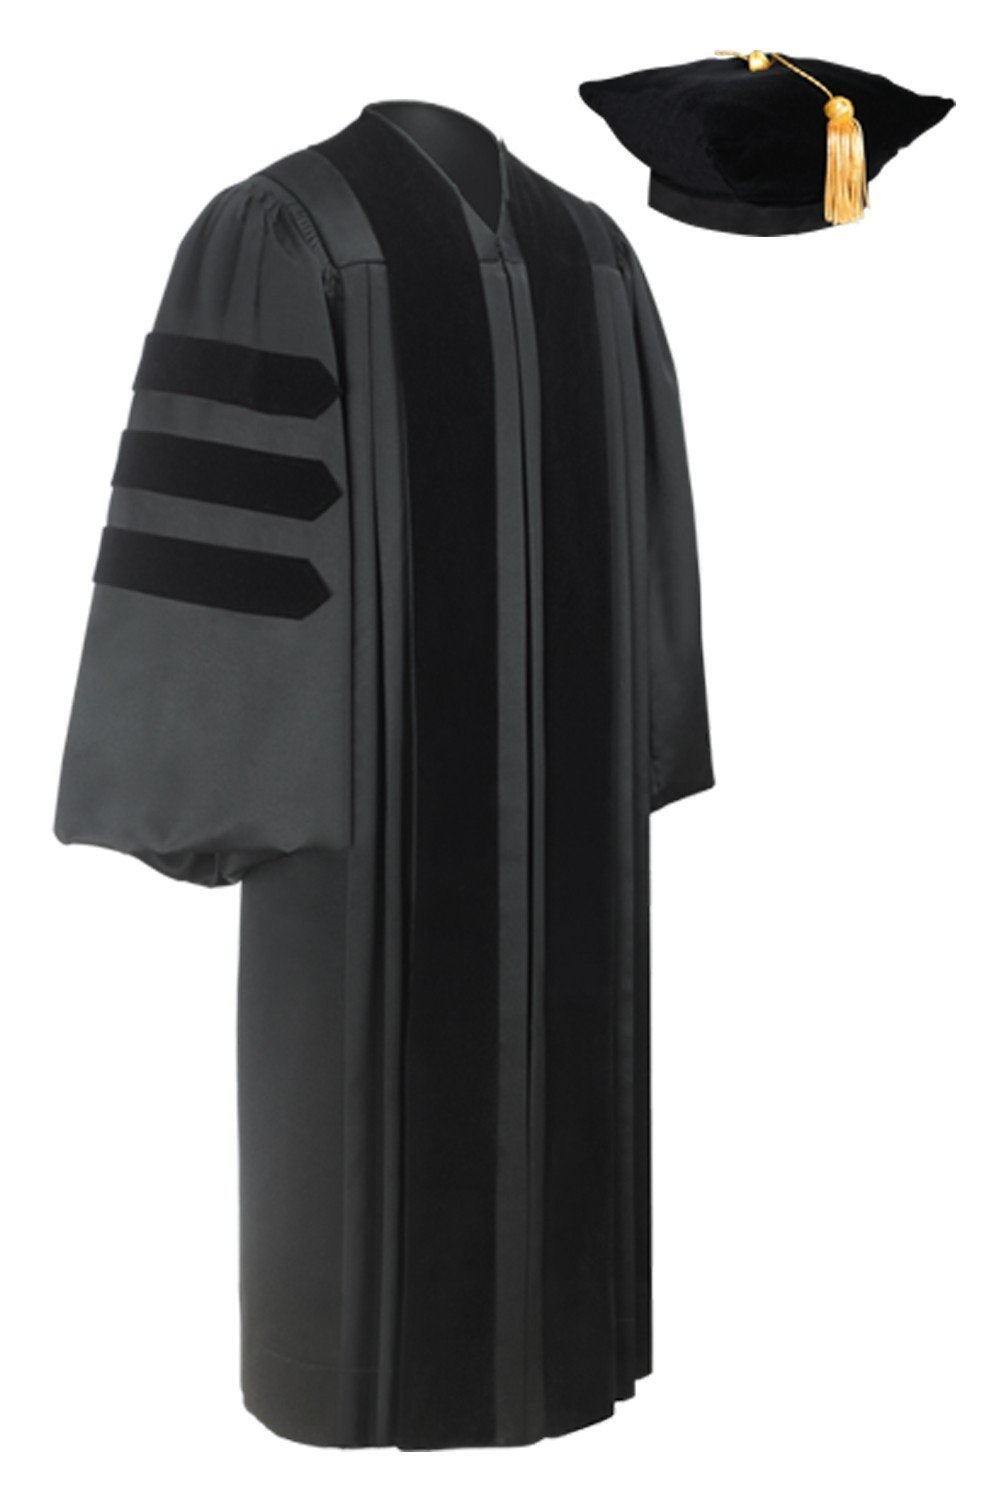 Academic Dress for Doctoral Degrees - Academic Dress - HKU - Ordinary  Degrees Congregation